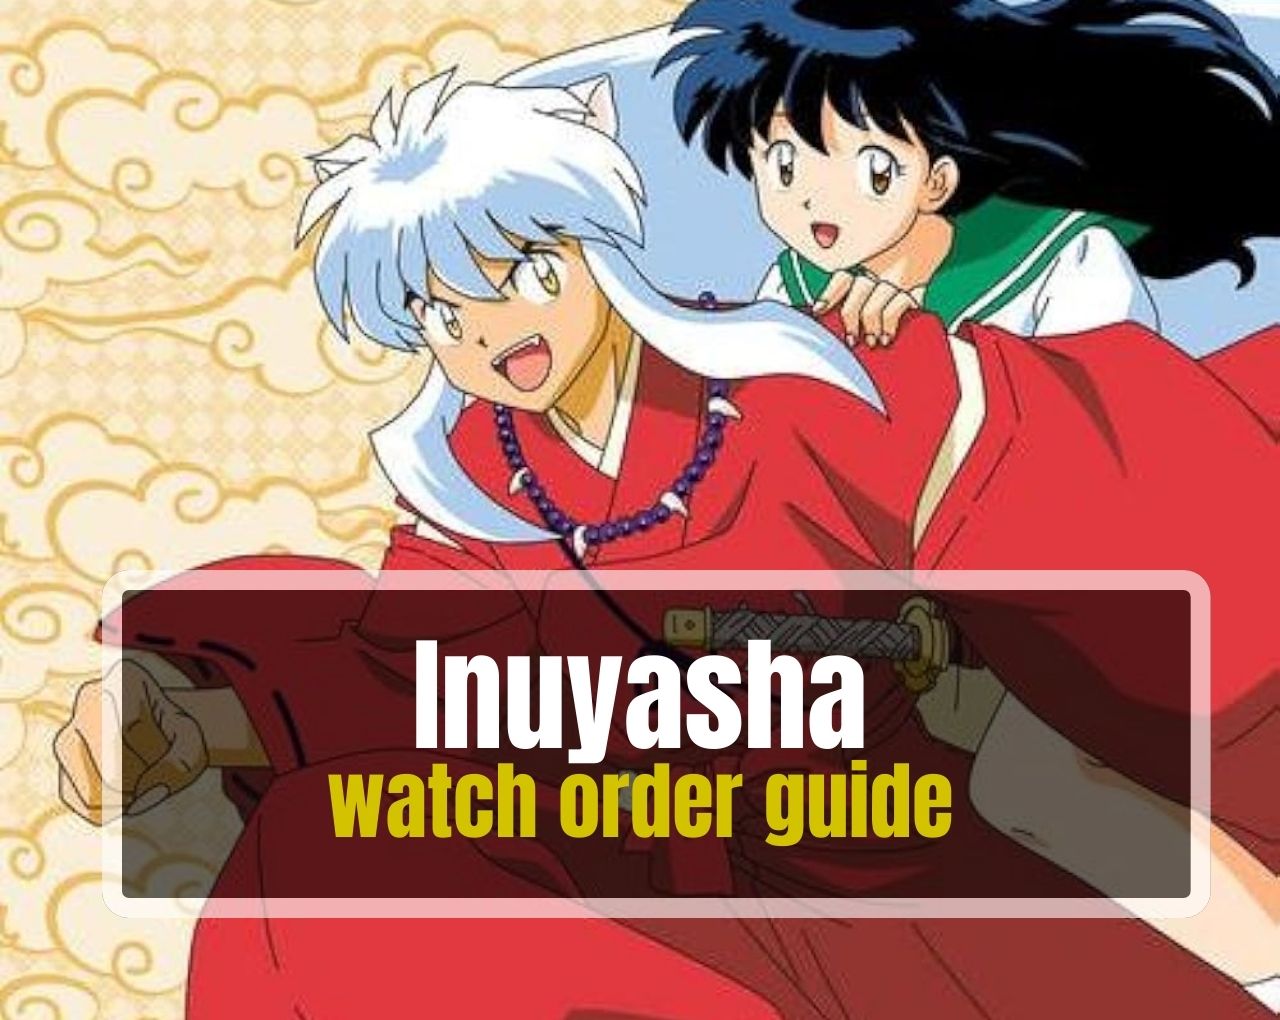 Inuyasha watch order guide